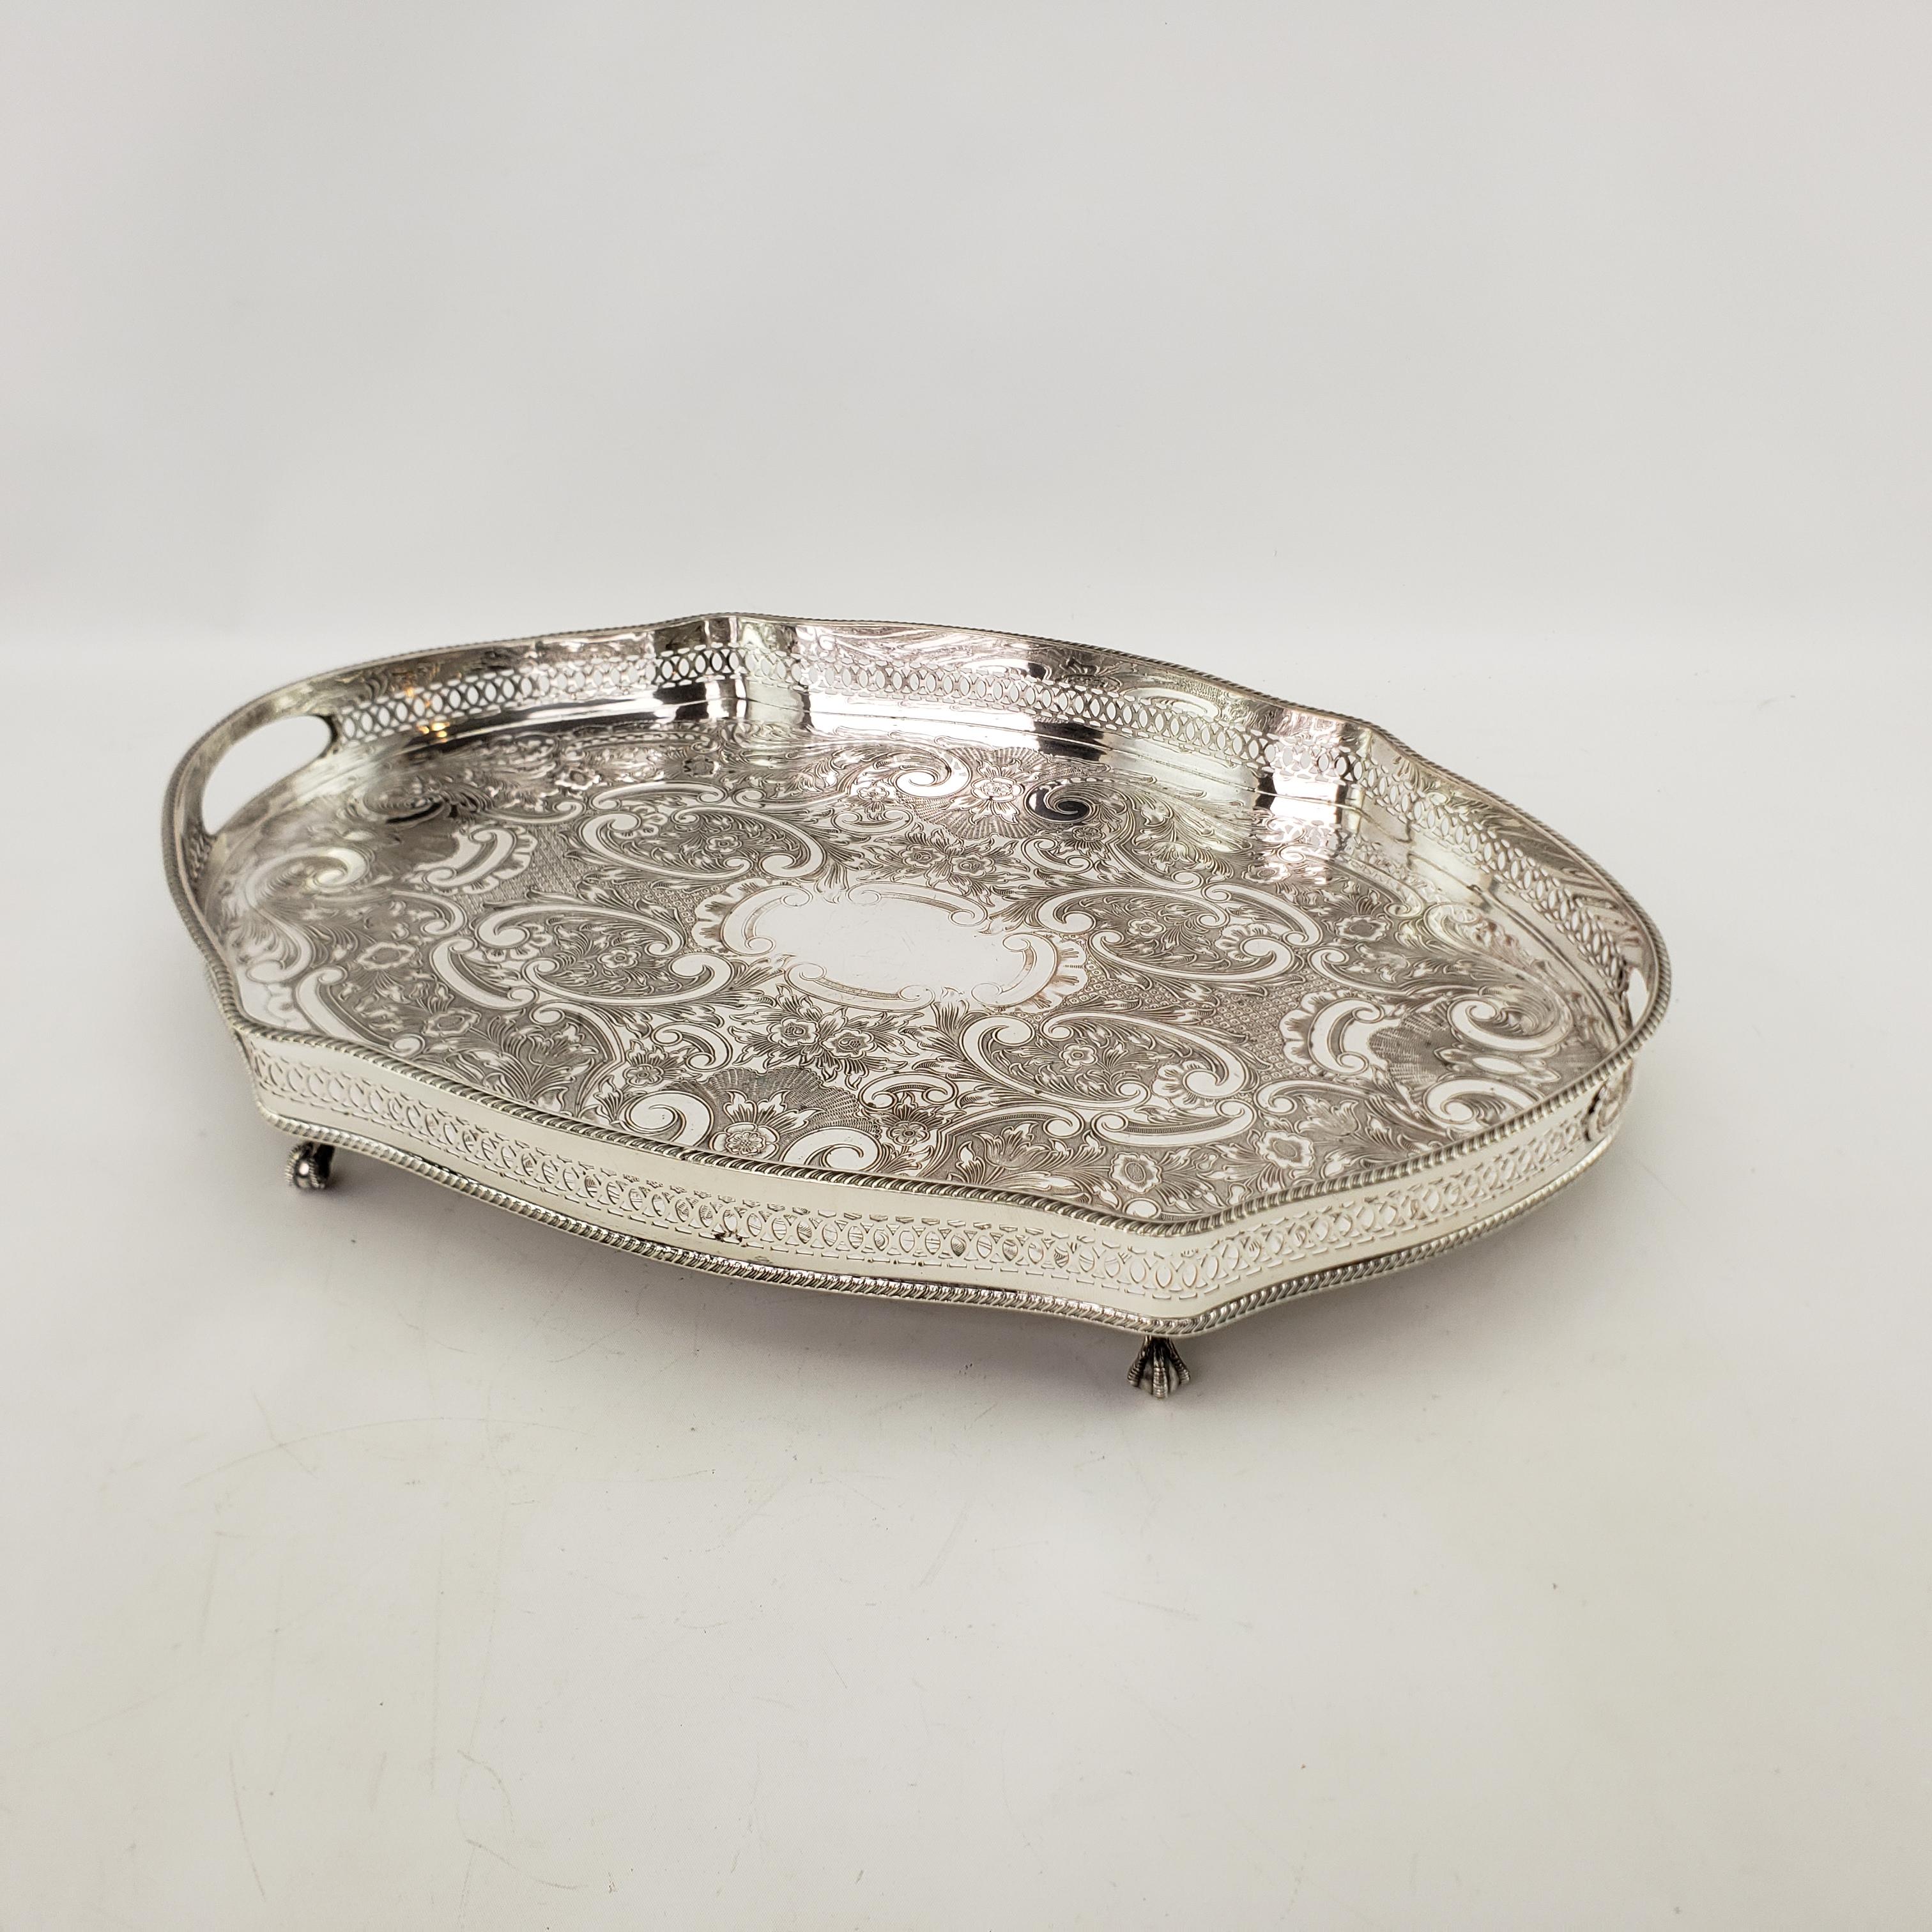 This antique gallery serving tray was made by APEX of England in approximately 1920 in a Victorian style. The tray is composed of silver plate with a serpentine shape and ornate engraving on the surface. The handles are inset within the gallery and